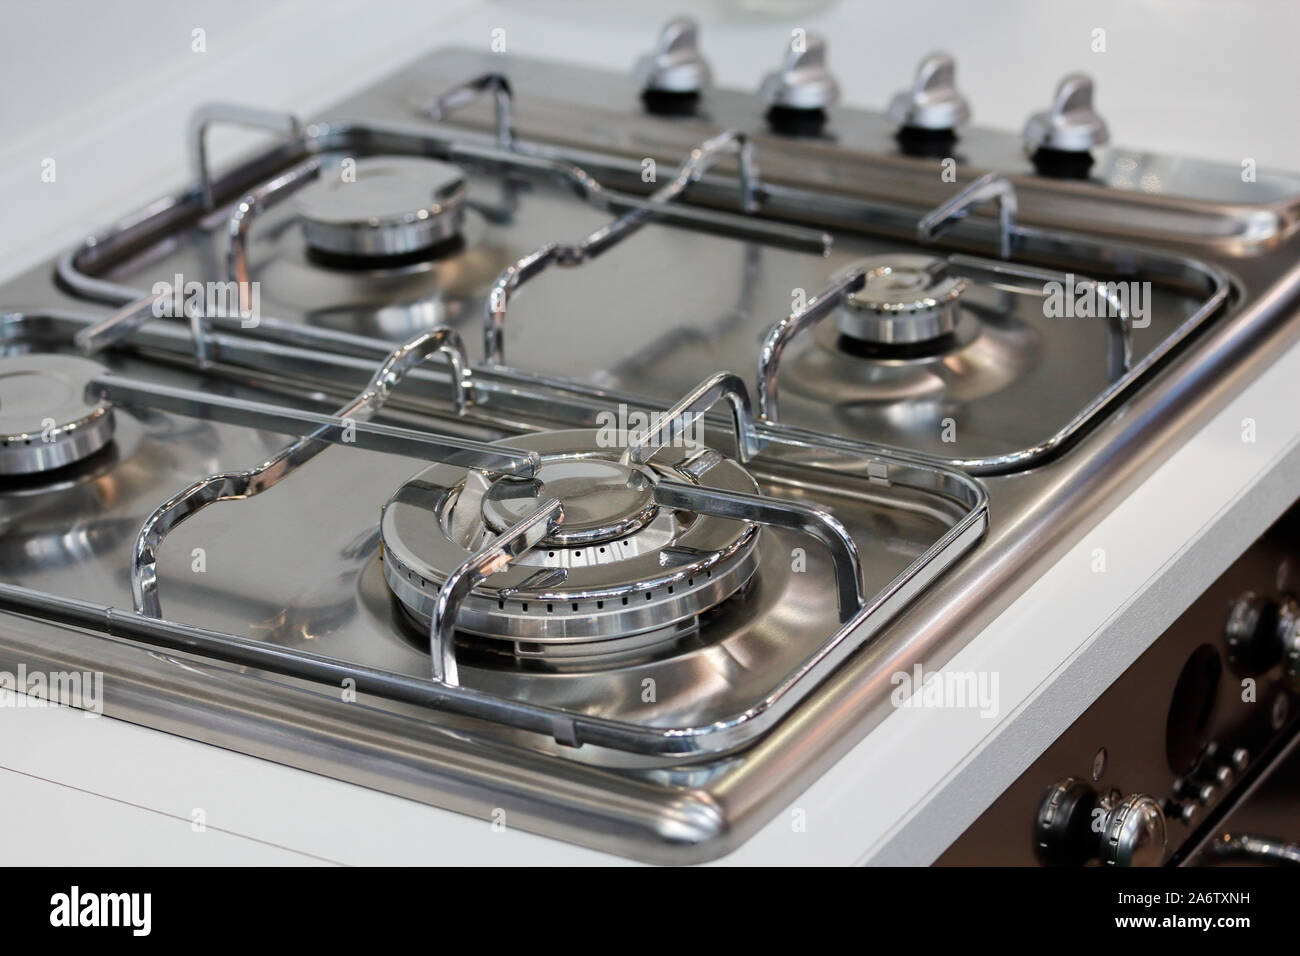 Stainless steel upper part of a gas cooking range. Selective focus. Stock Photo